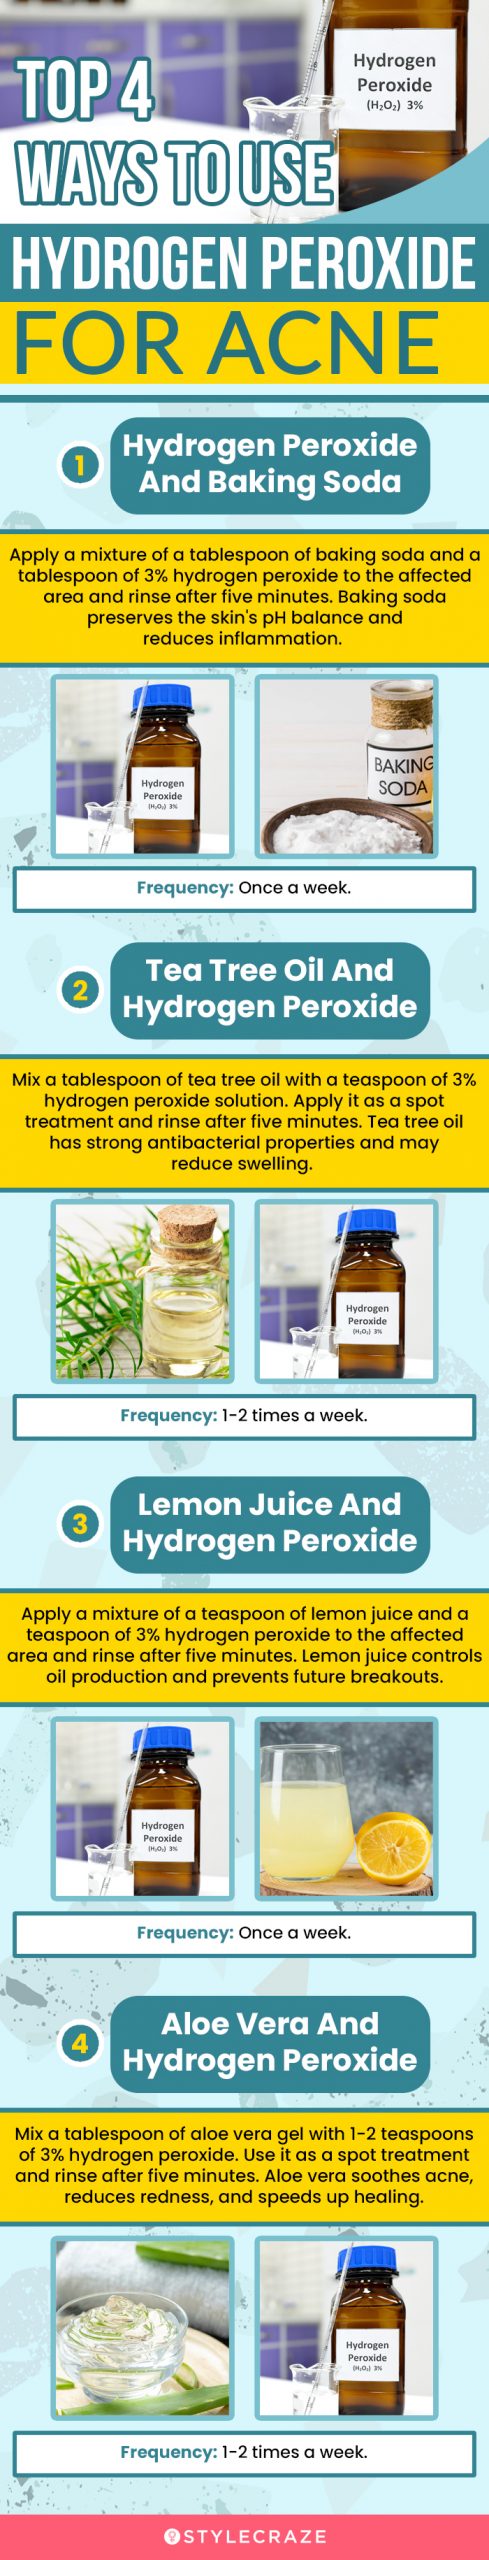 top 4 ways to use hydrogen peroxide for acne [infographic]